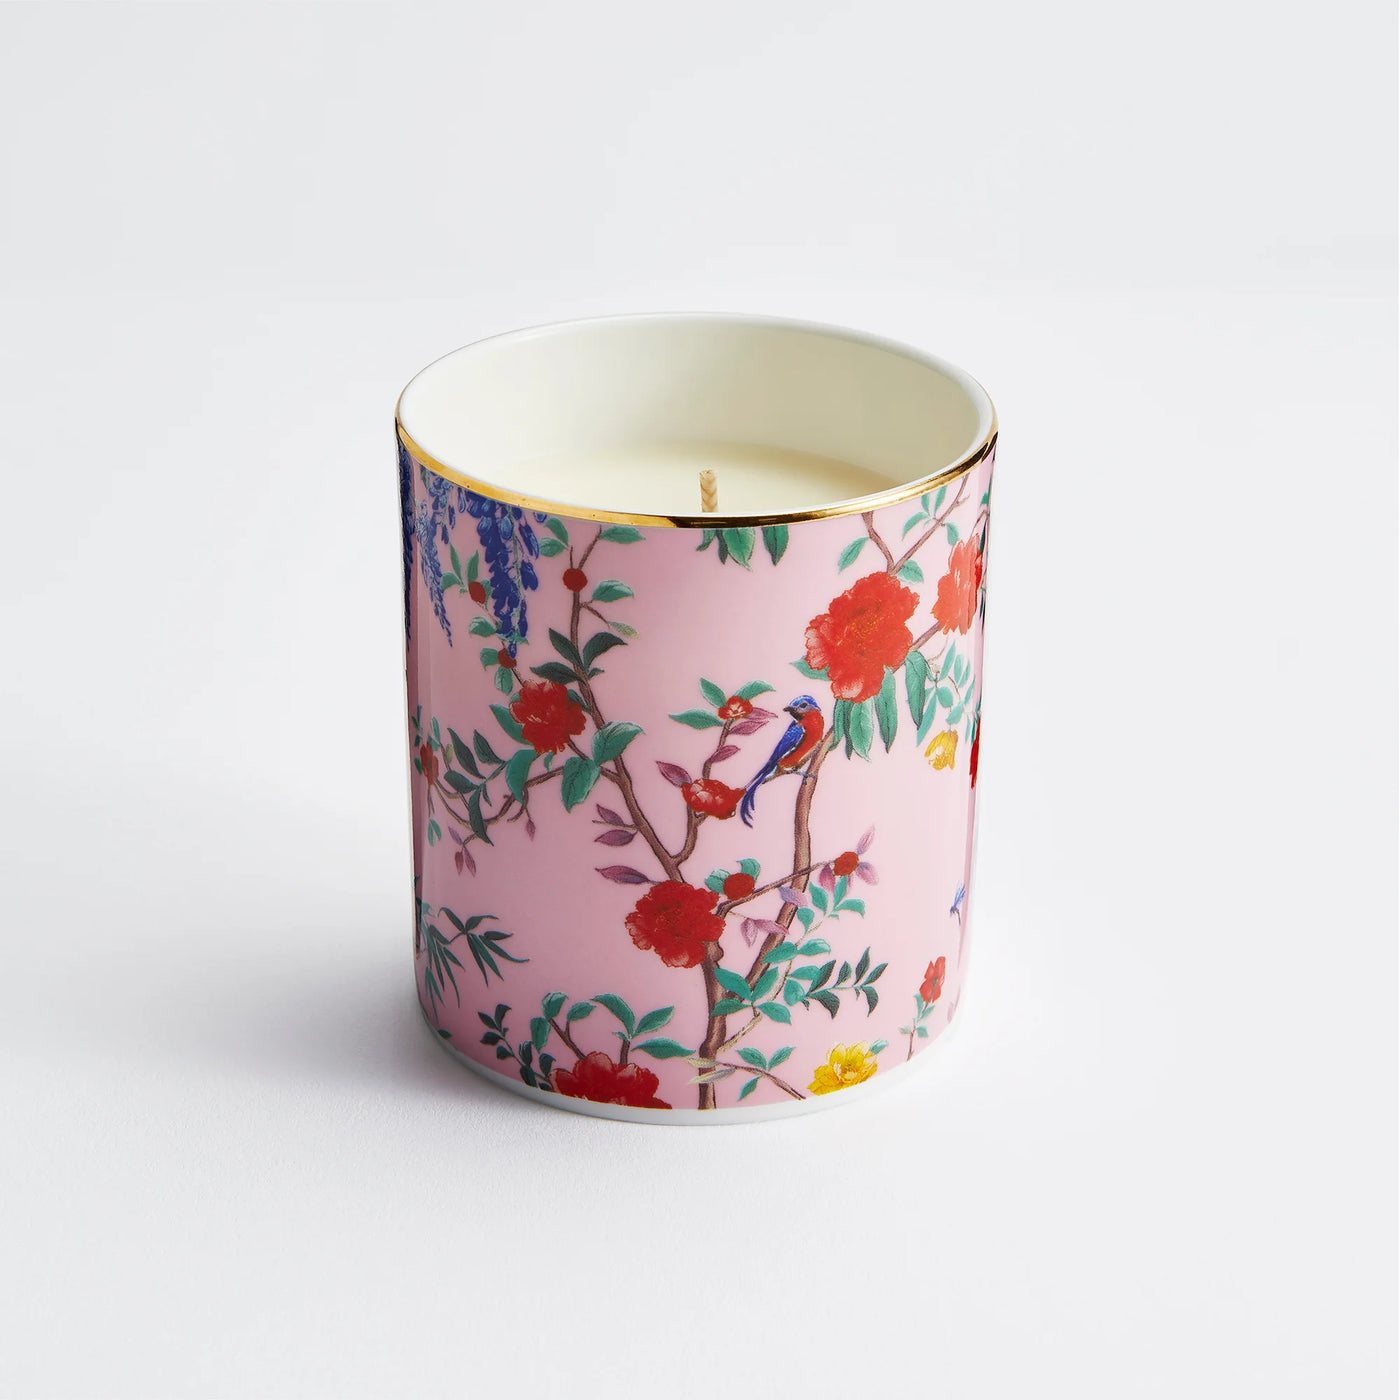 Maison Splendid fine bone china candle in pink chinoiserie design scent number two